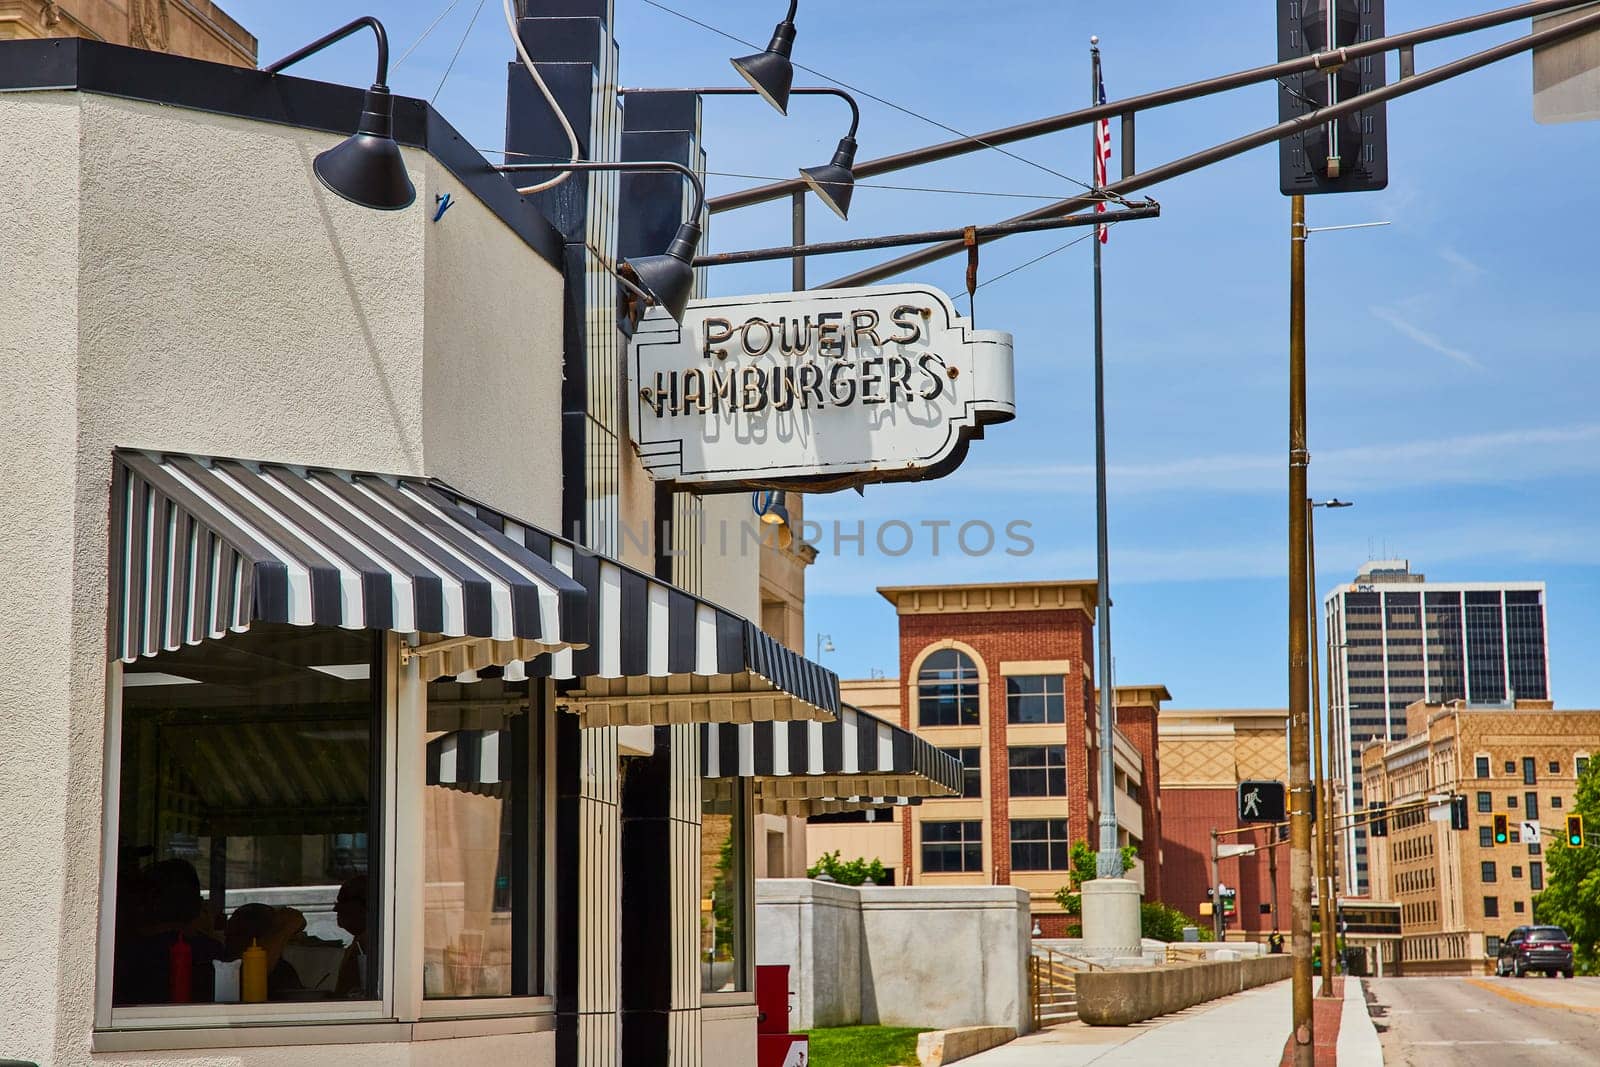 Powers Hamburgers in Fort Wayne, Indiana: A blend of historic charm and modern urban skyline.